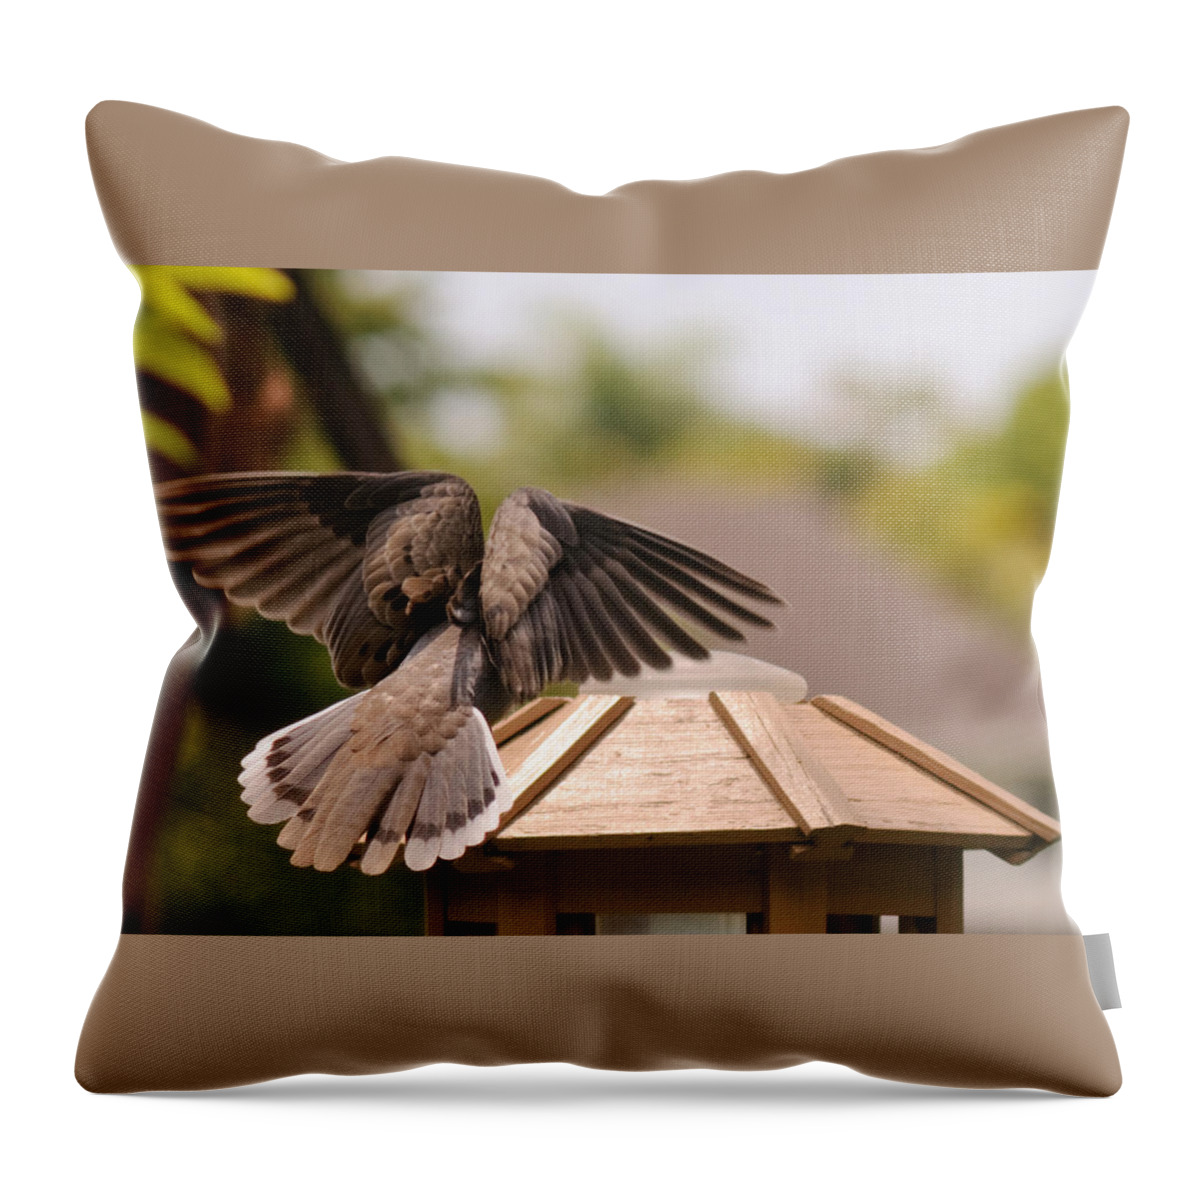 Mourning Dove Throw Pillow featuring the photograph The View From My Window - Mourning Dove #1 by Winston D Munnings